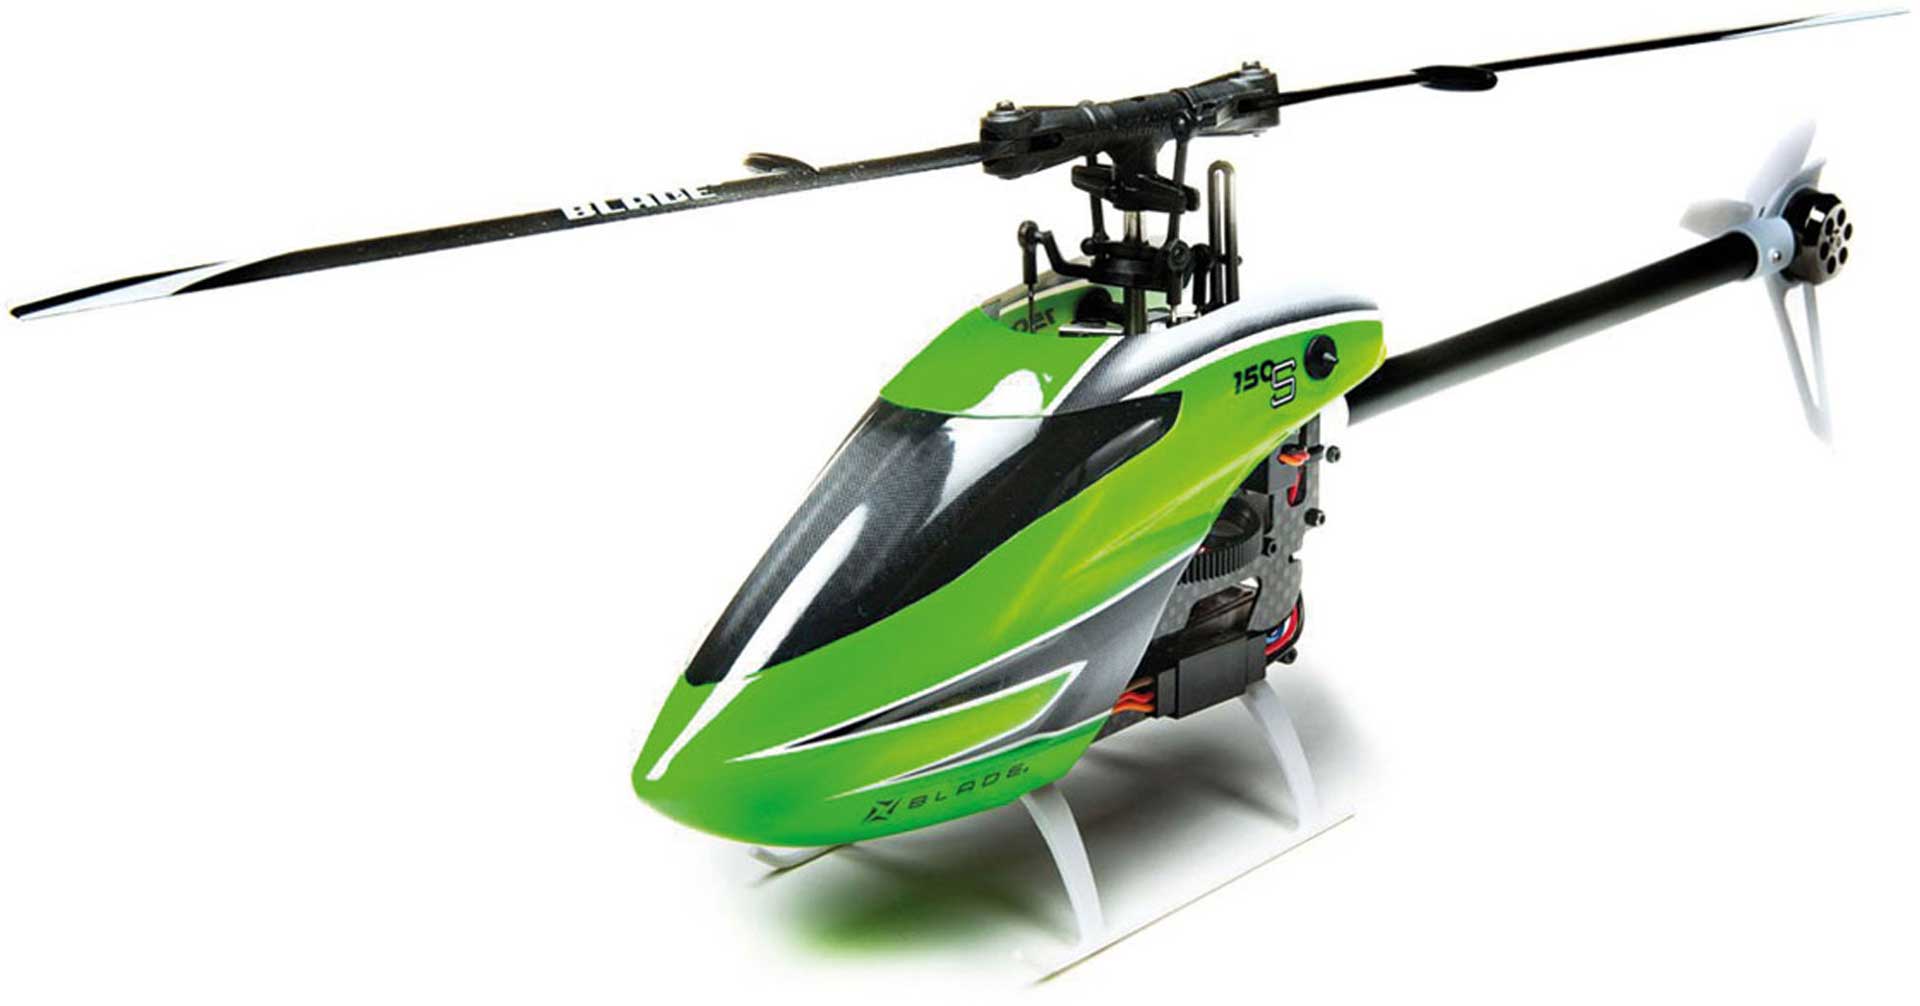 BLADE 150 S BNF BASIC HELICOPTER